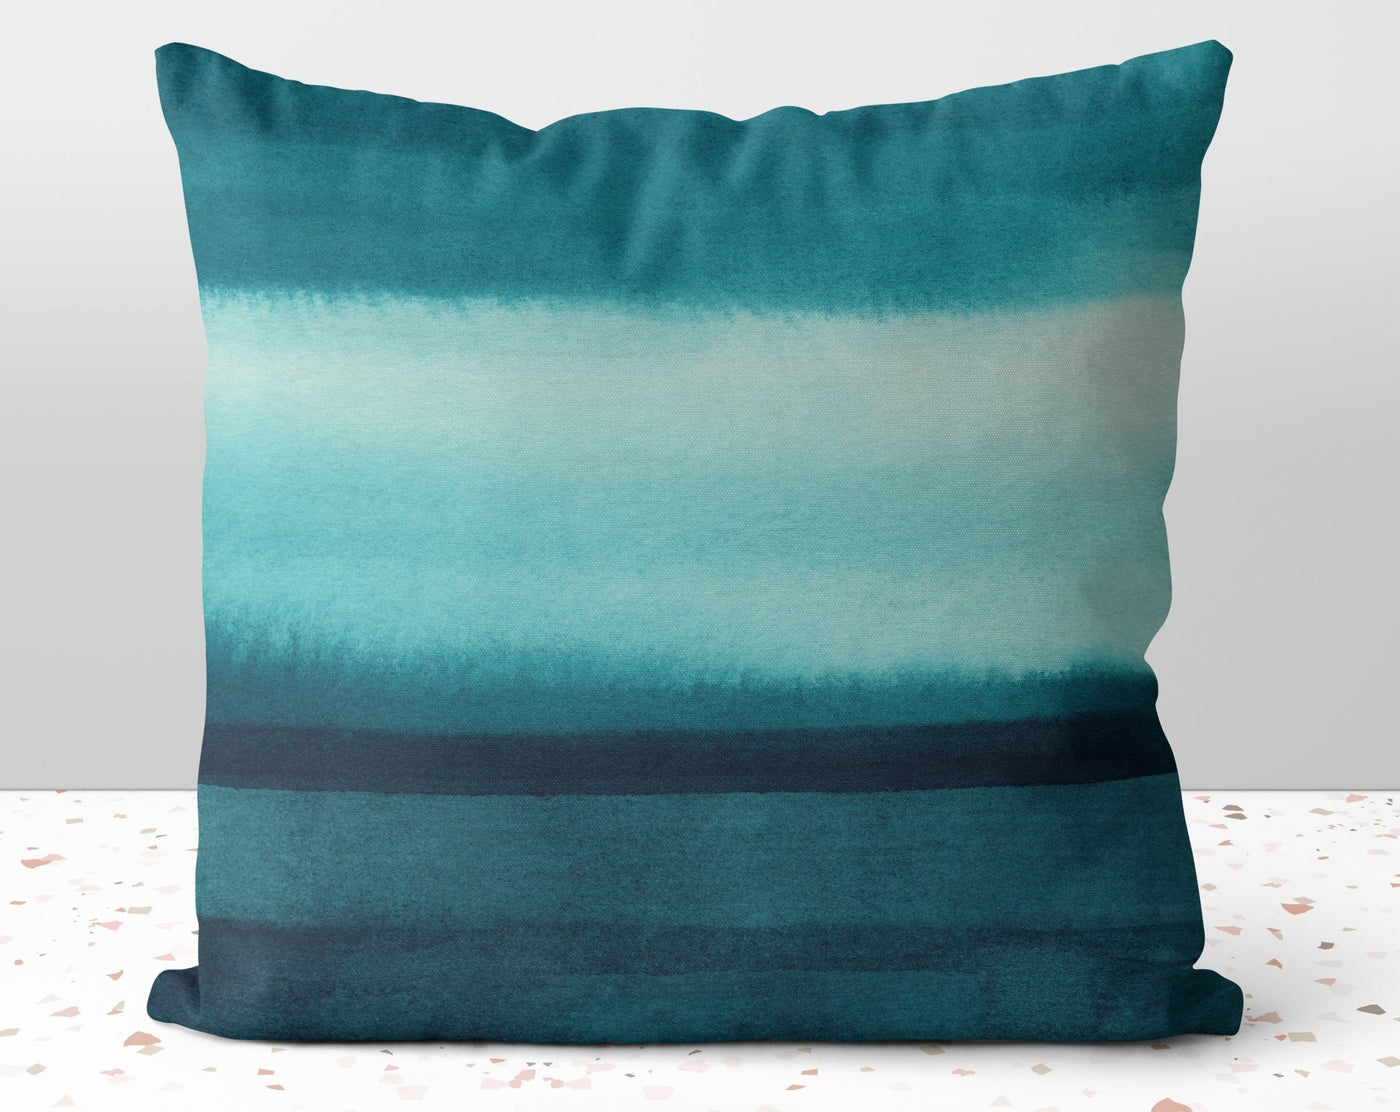 Abstract Turquoise Ocean Landscape Stripes Square Pillow with Cover Throw with Insert - Cush Potato Pillows